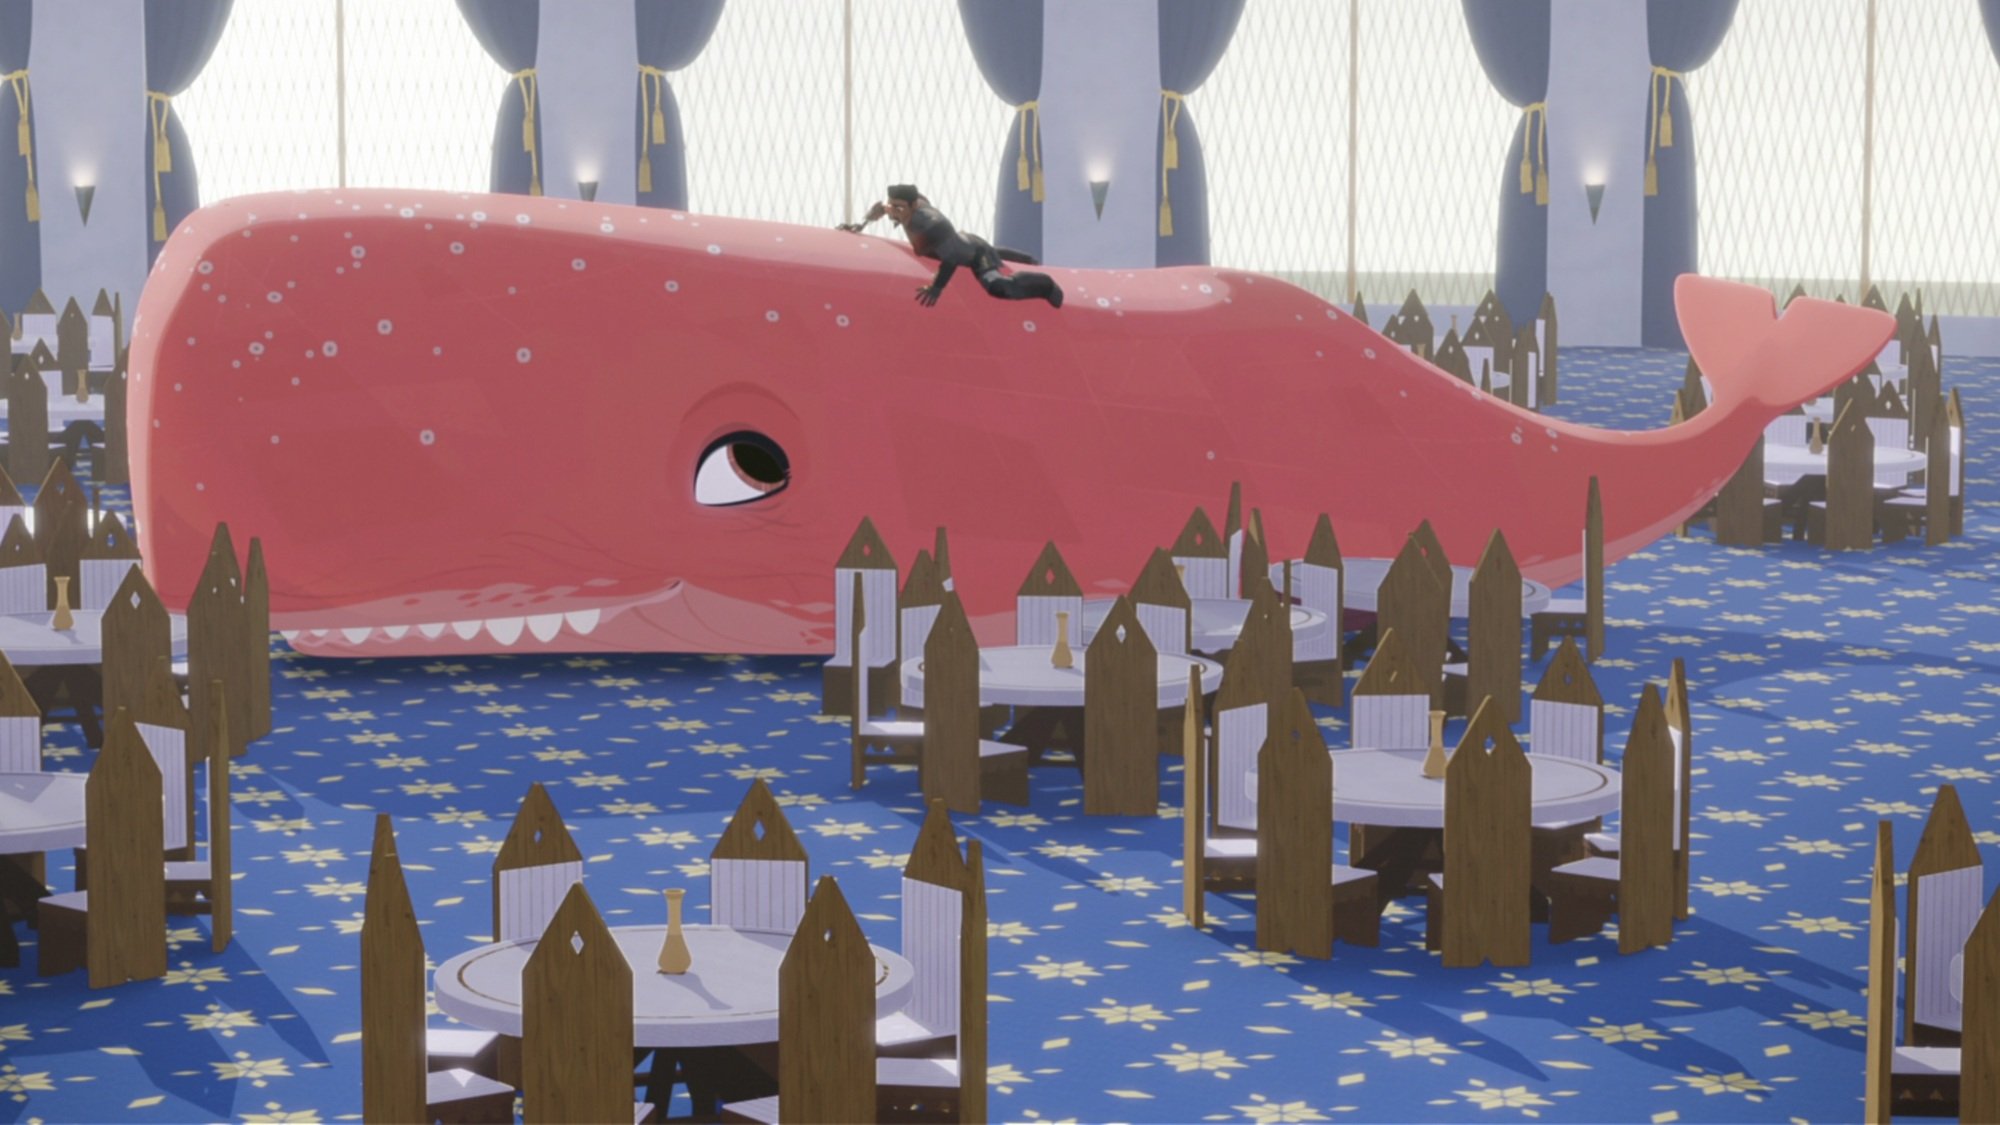 A knight in black armor rests on the back of a large pink whale in a fancy dining room with blue carpeting.